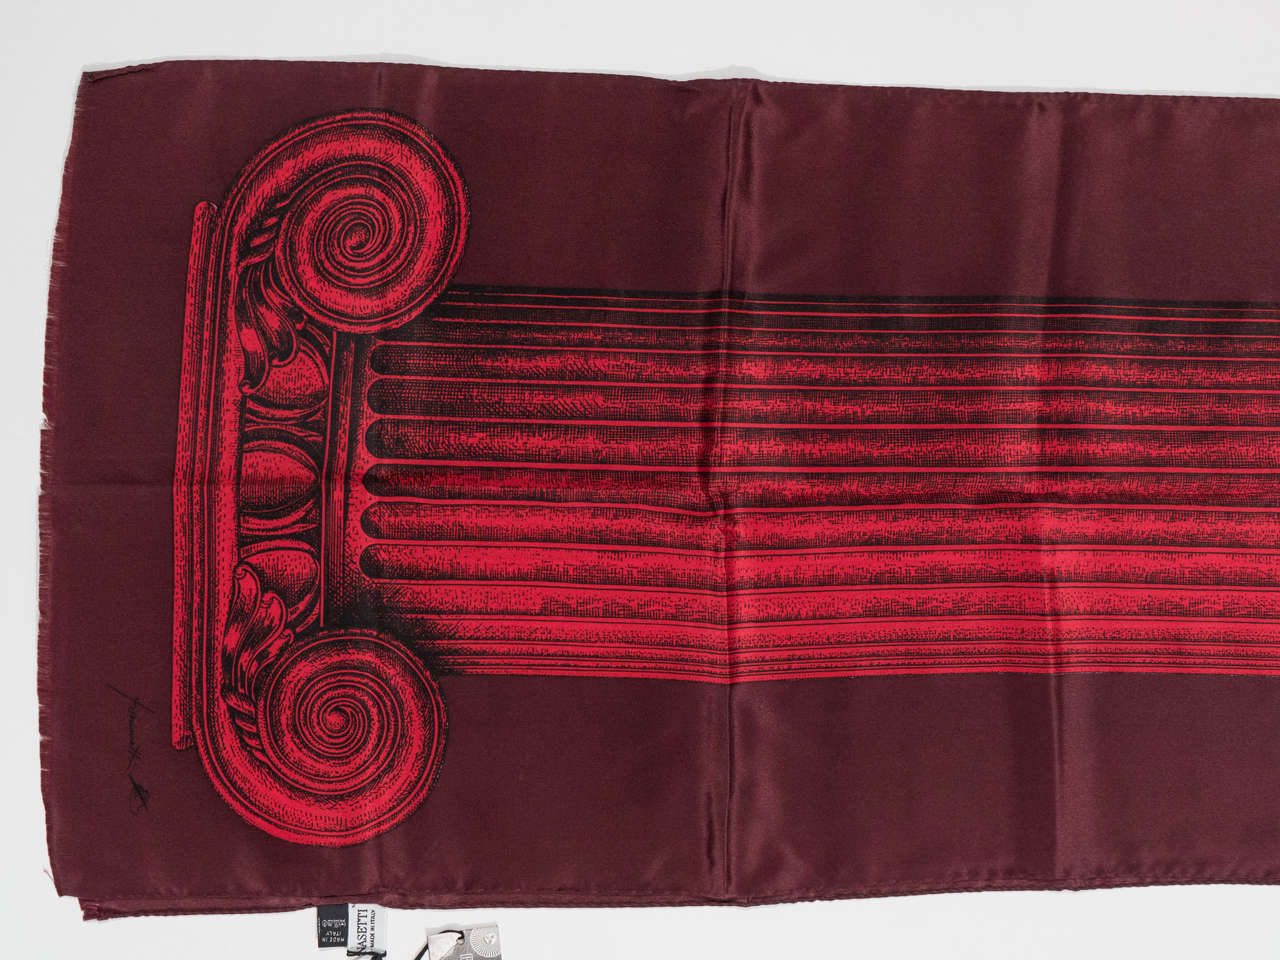 Italian Piero Fornasetti Scarf with Column Motif in Red, Burgundy and Black, Italy, 2000